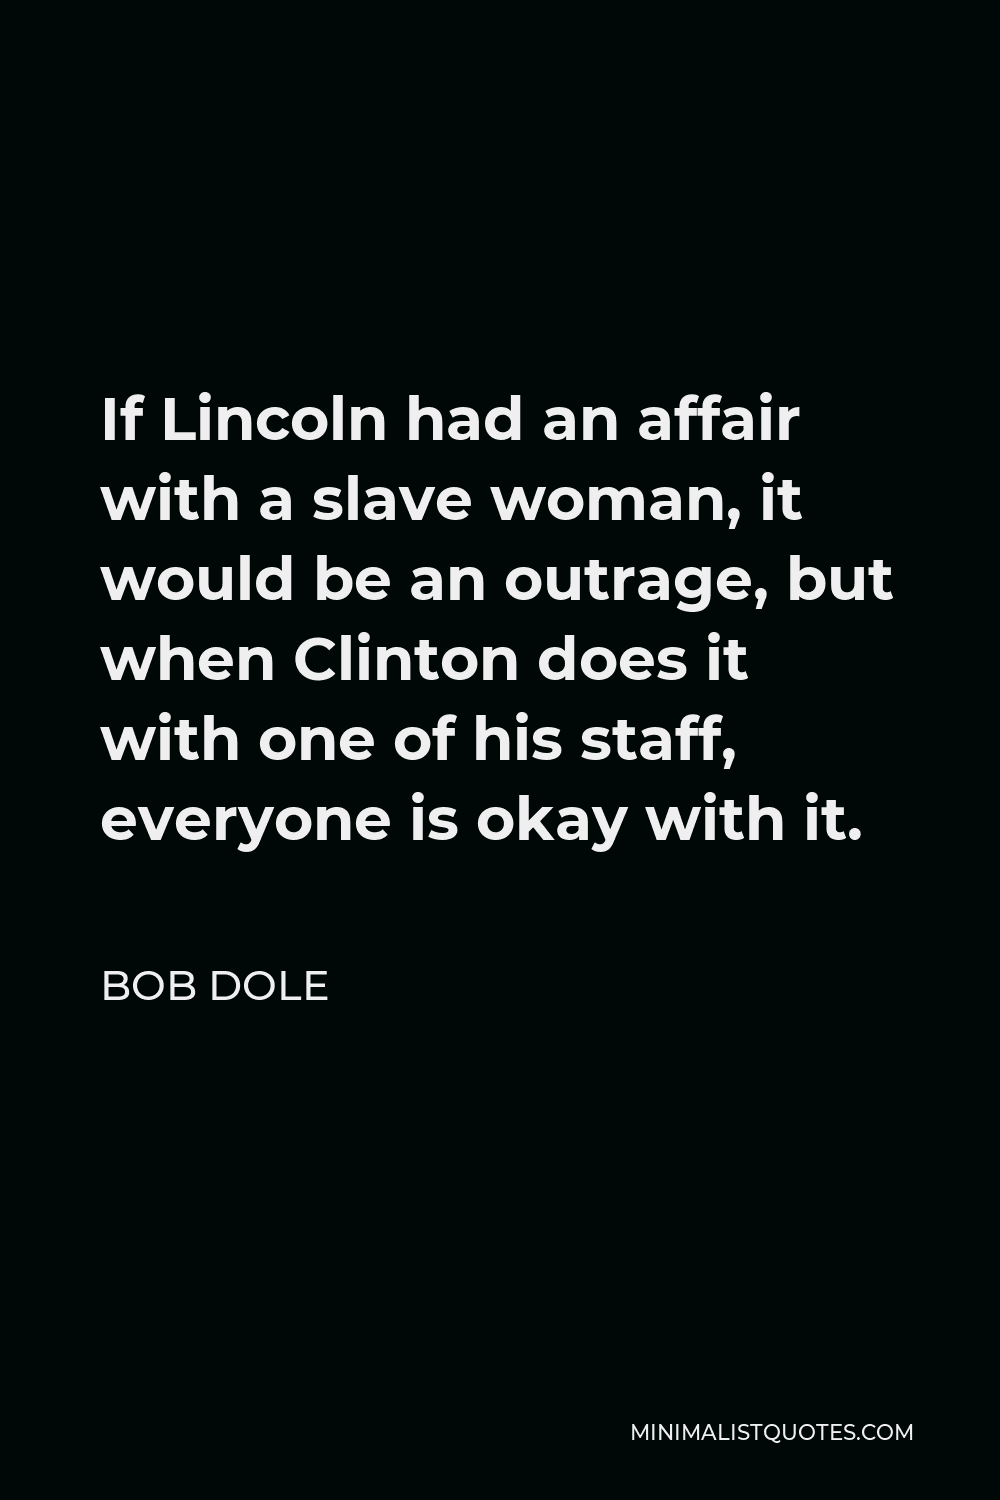 Bob Dole Quote - If Lincoln had an affair with a slave woman, it would be an outrage, but when Clinton does it with one of his staff, everyone is okay with it.